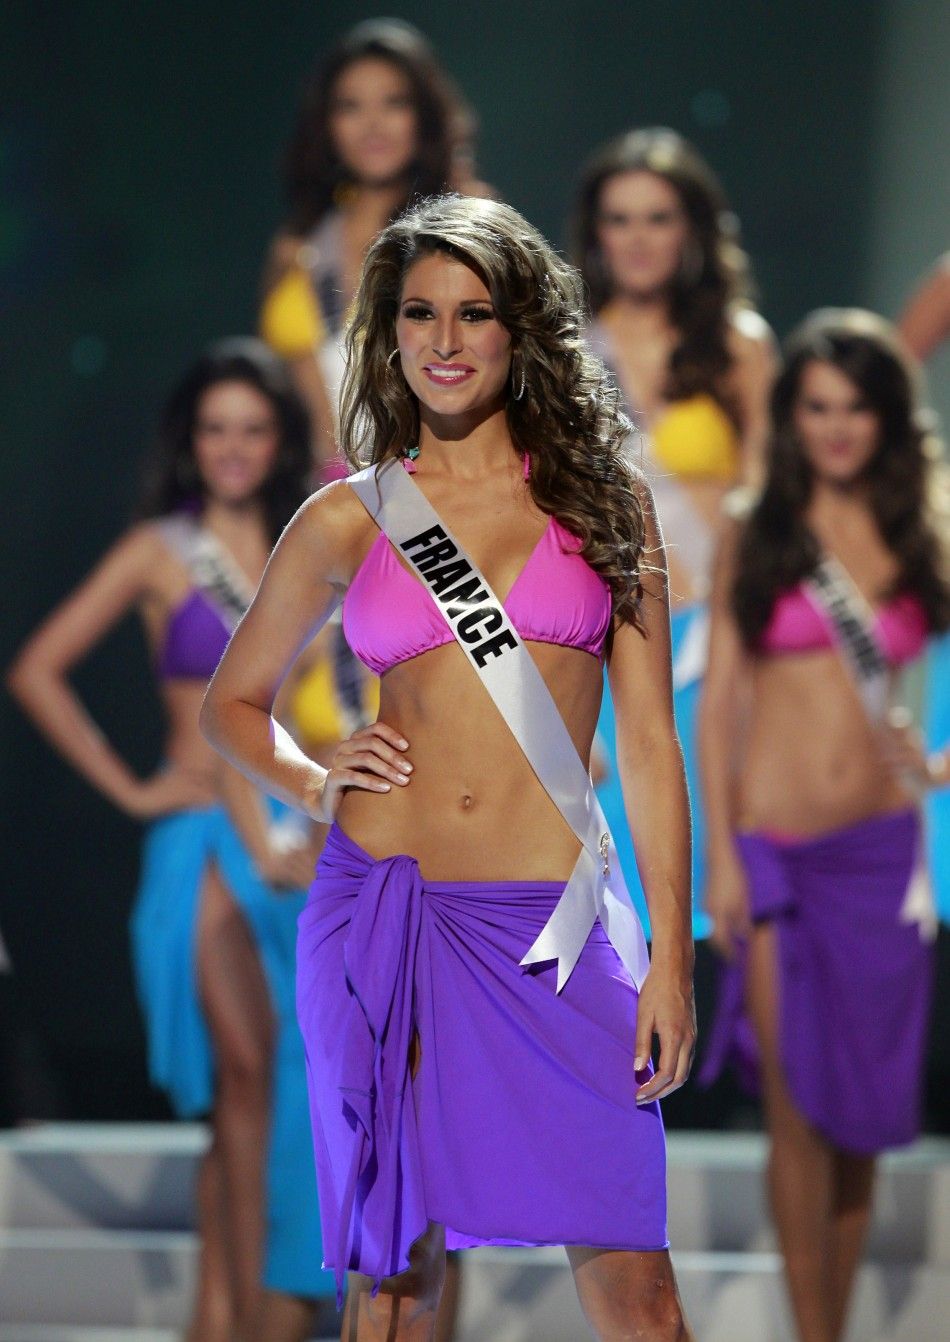 Miss France Laury Thilleman steps forward after being chosen among the final ten contestants of the Miss Universe 2011 pageant in Sao Paulo